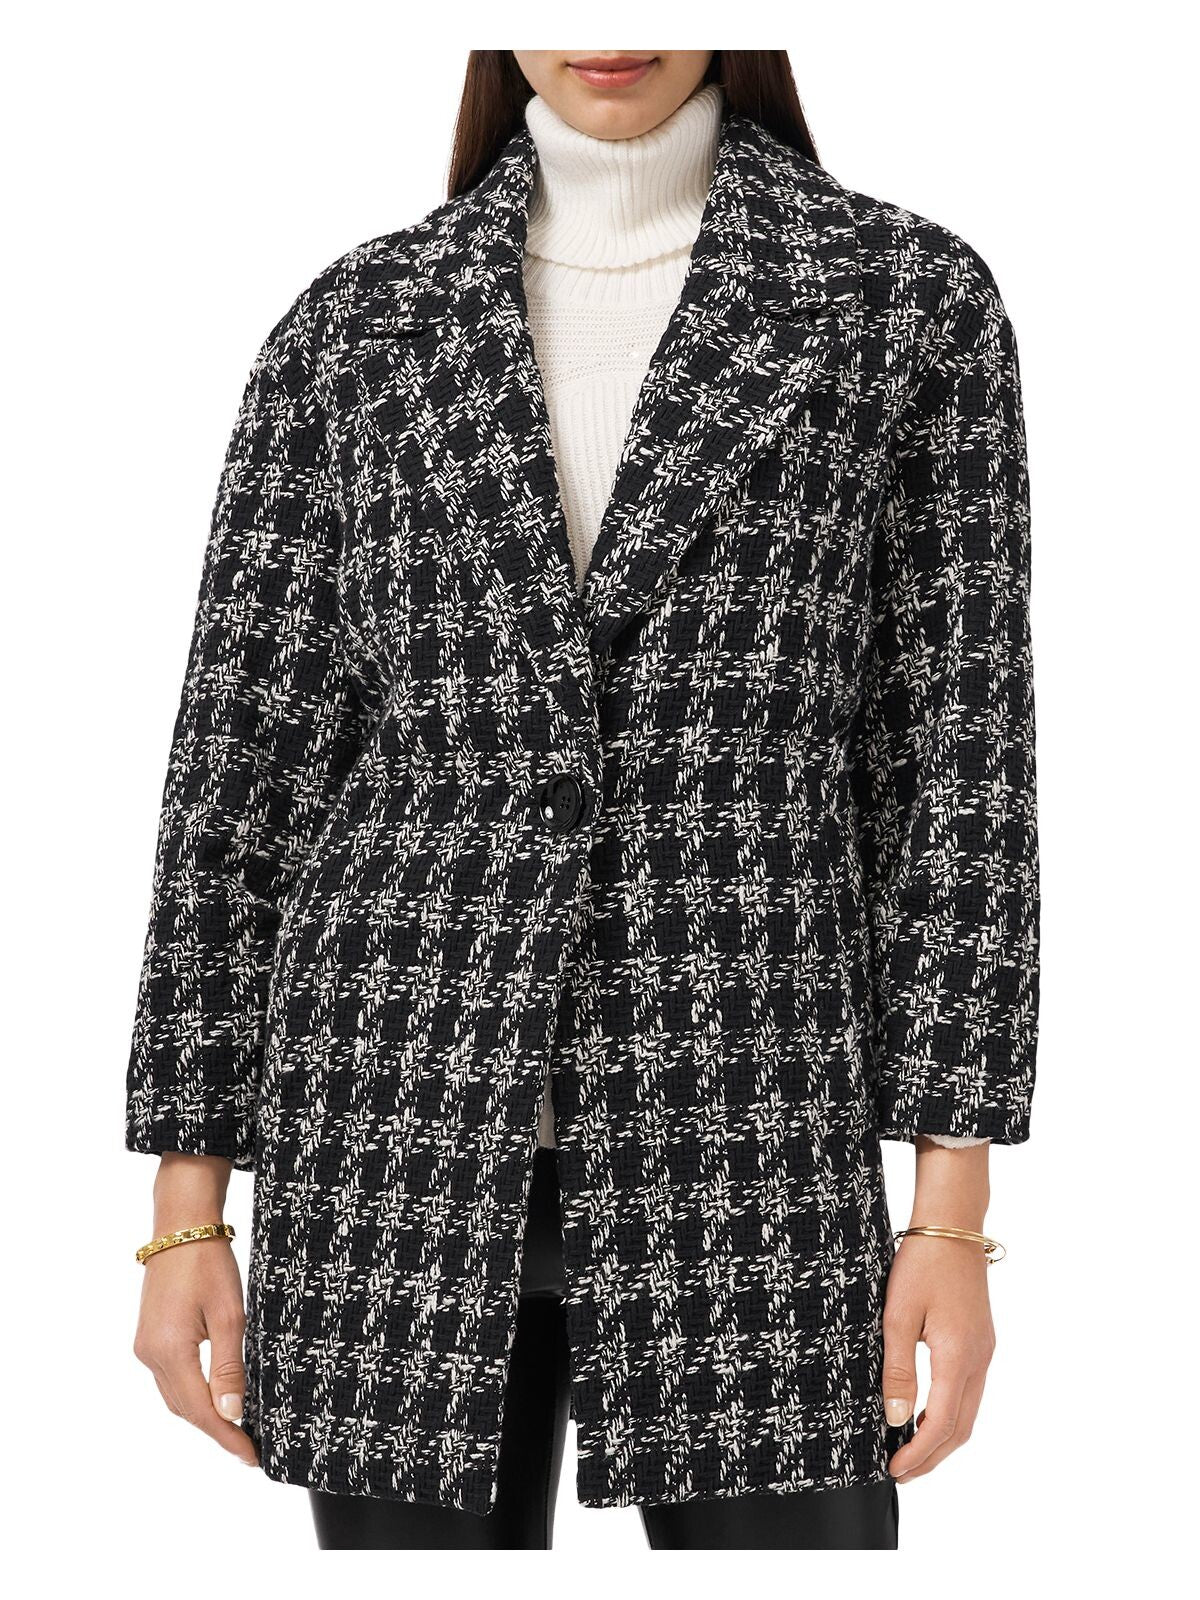 VINCE CAMUTO Womens Black Pocketed Notch Lapels Long Sleeves Lined Houndstooth Jacket M